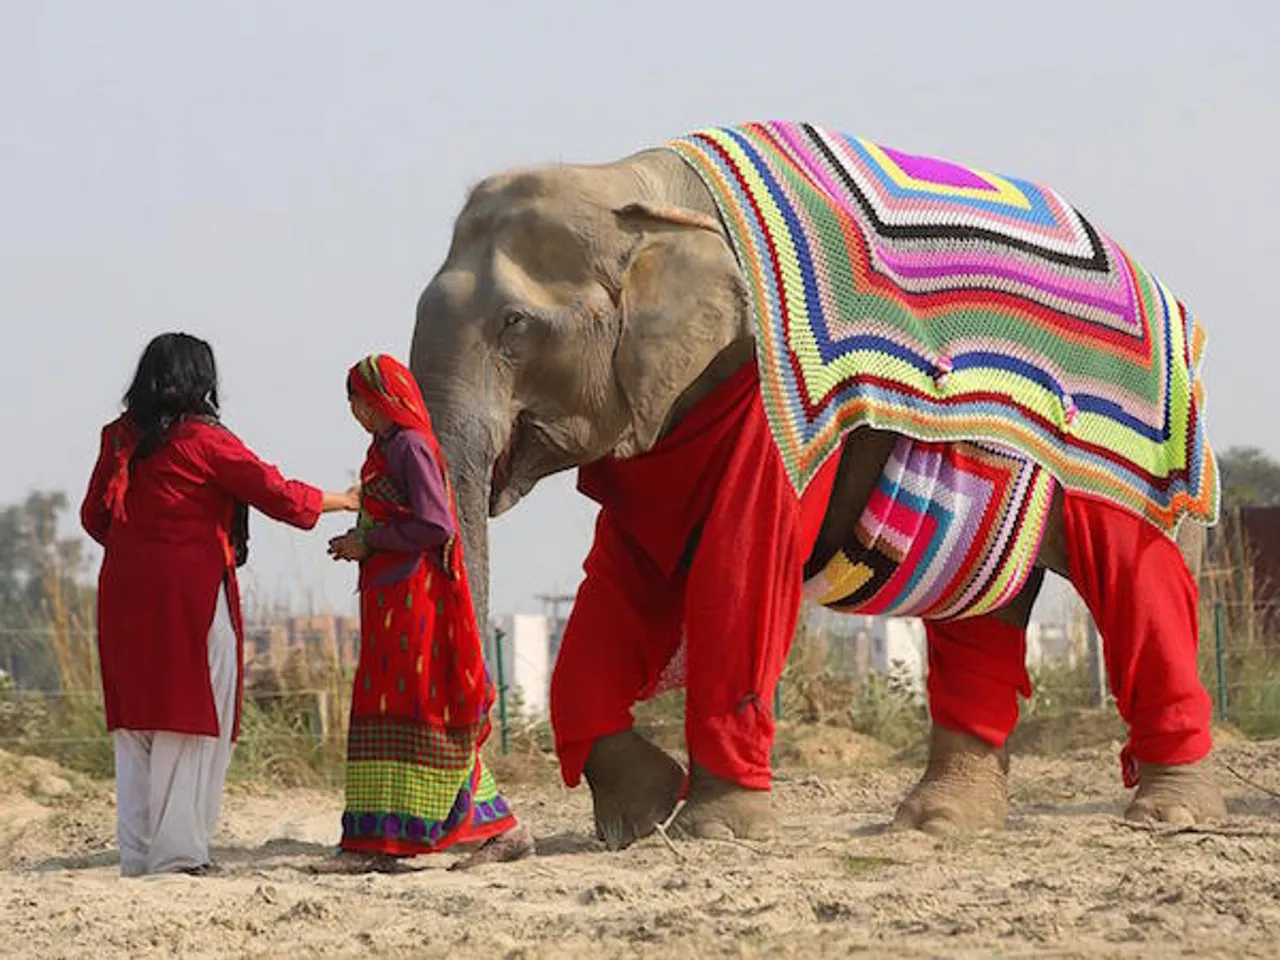 Indian women knit pyjamas for elephants to beat the cold